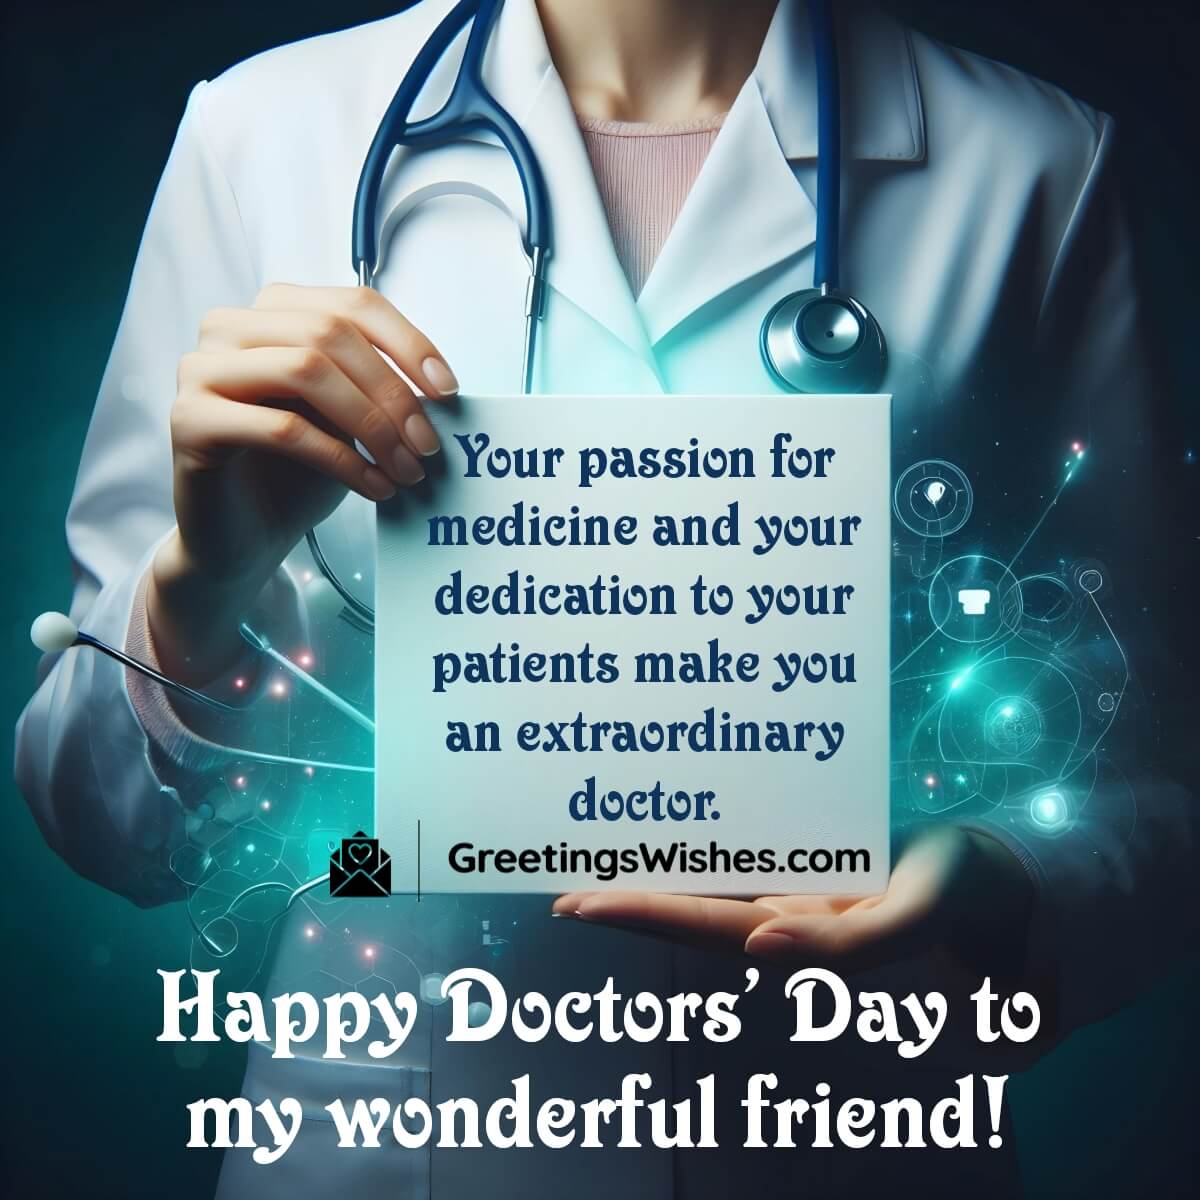 National Doctors’ Day Wishes For Friends